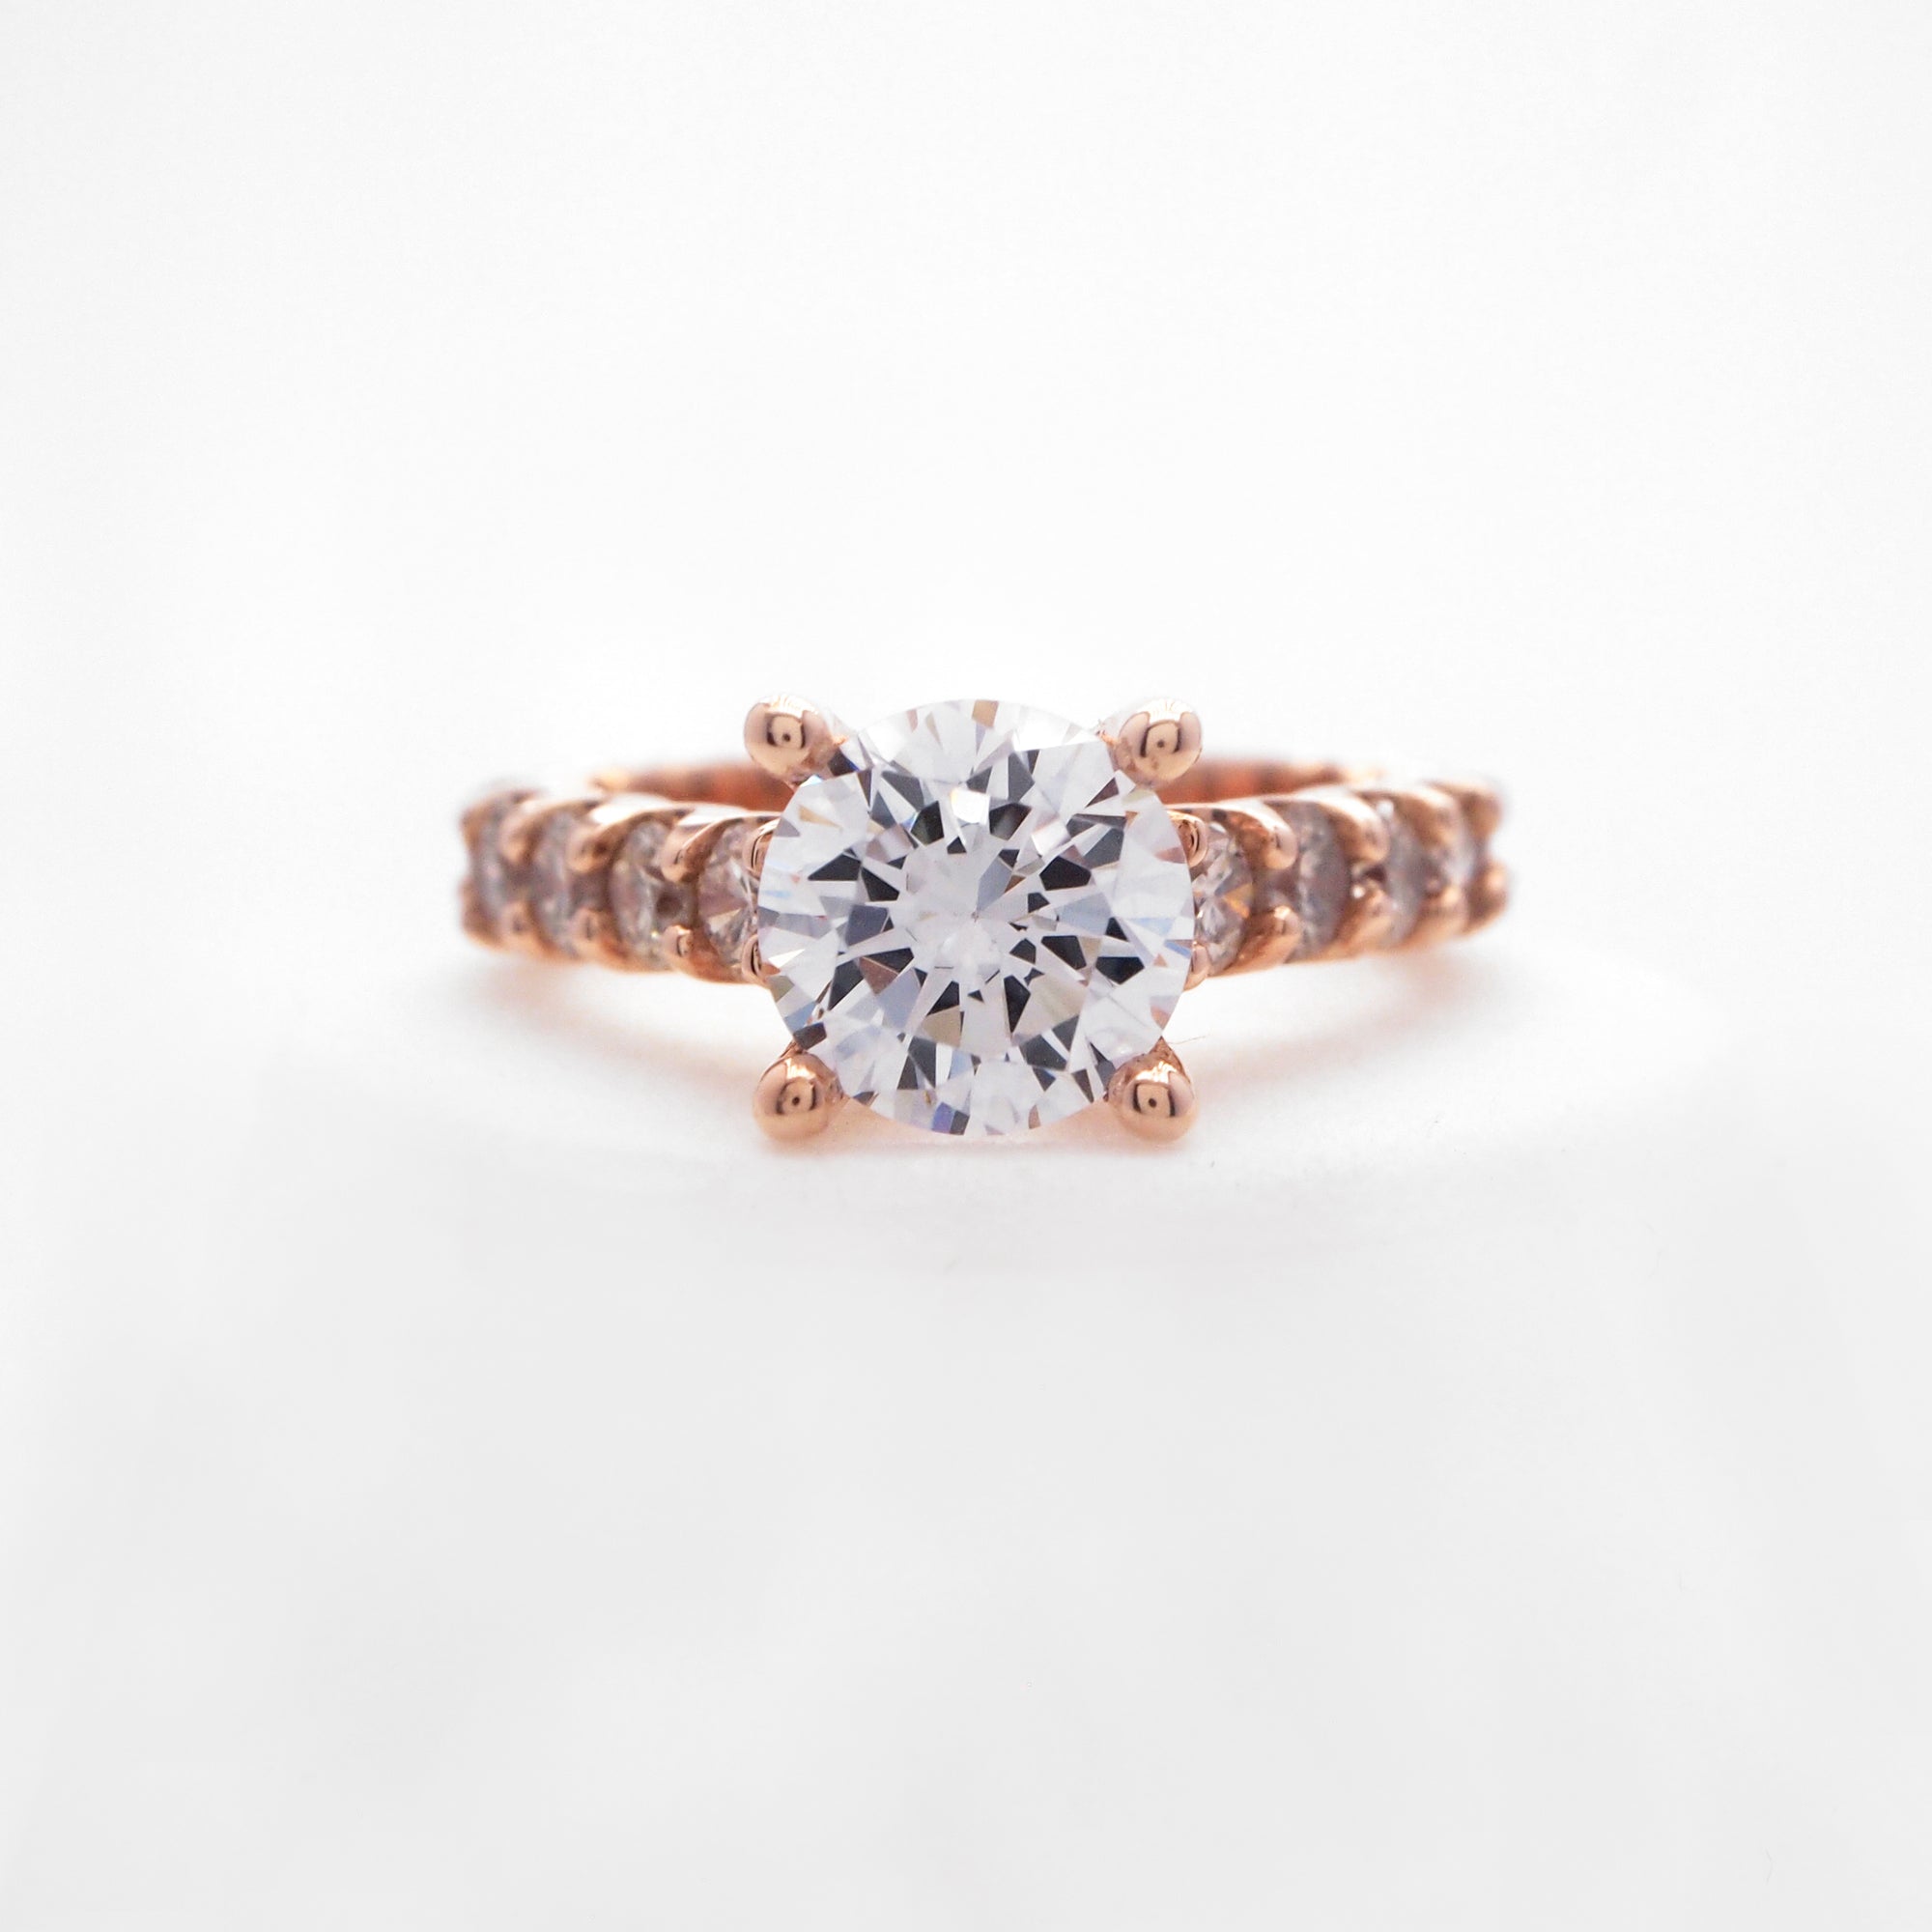 14K rose gold diamond engagement ring with round brilliant diamonds weighing a total of 1.40 carats. 